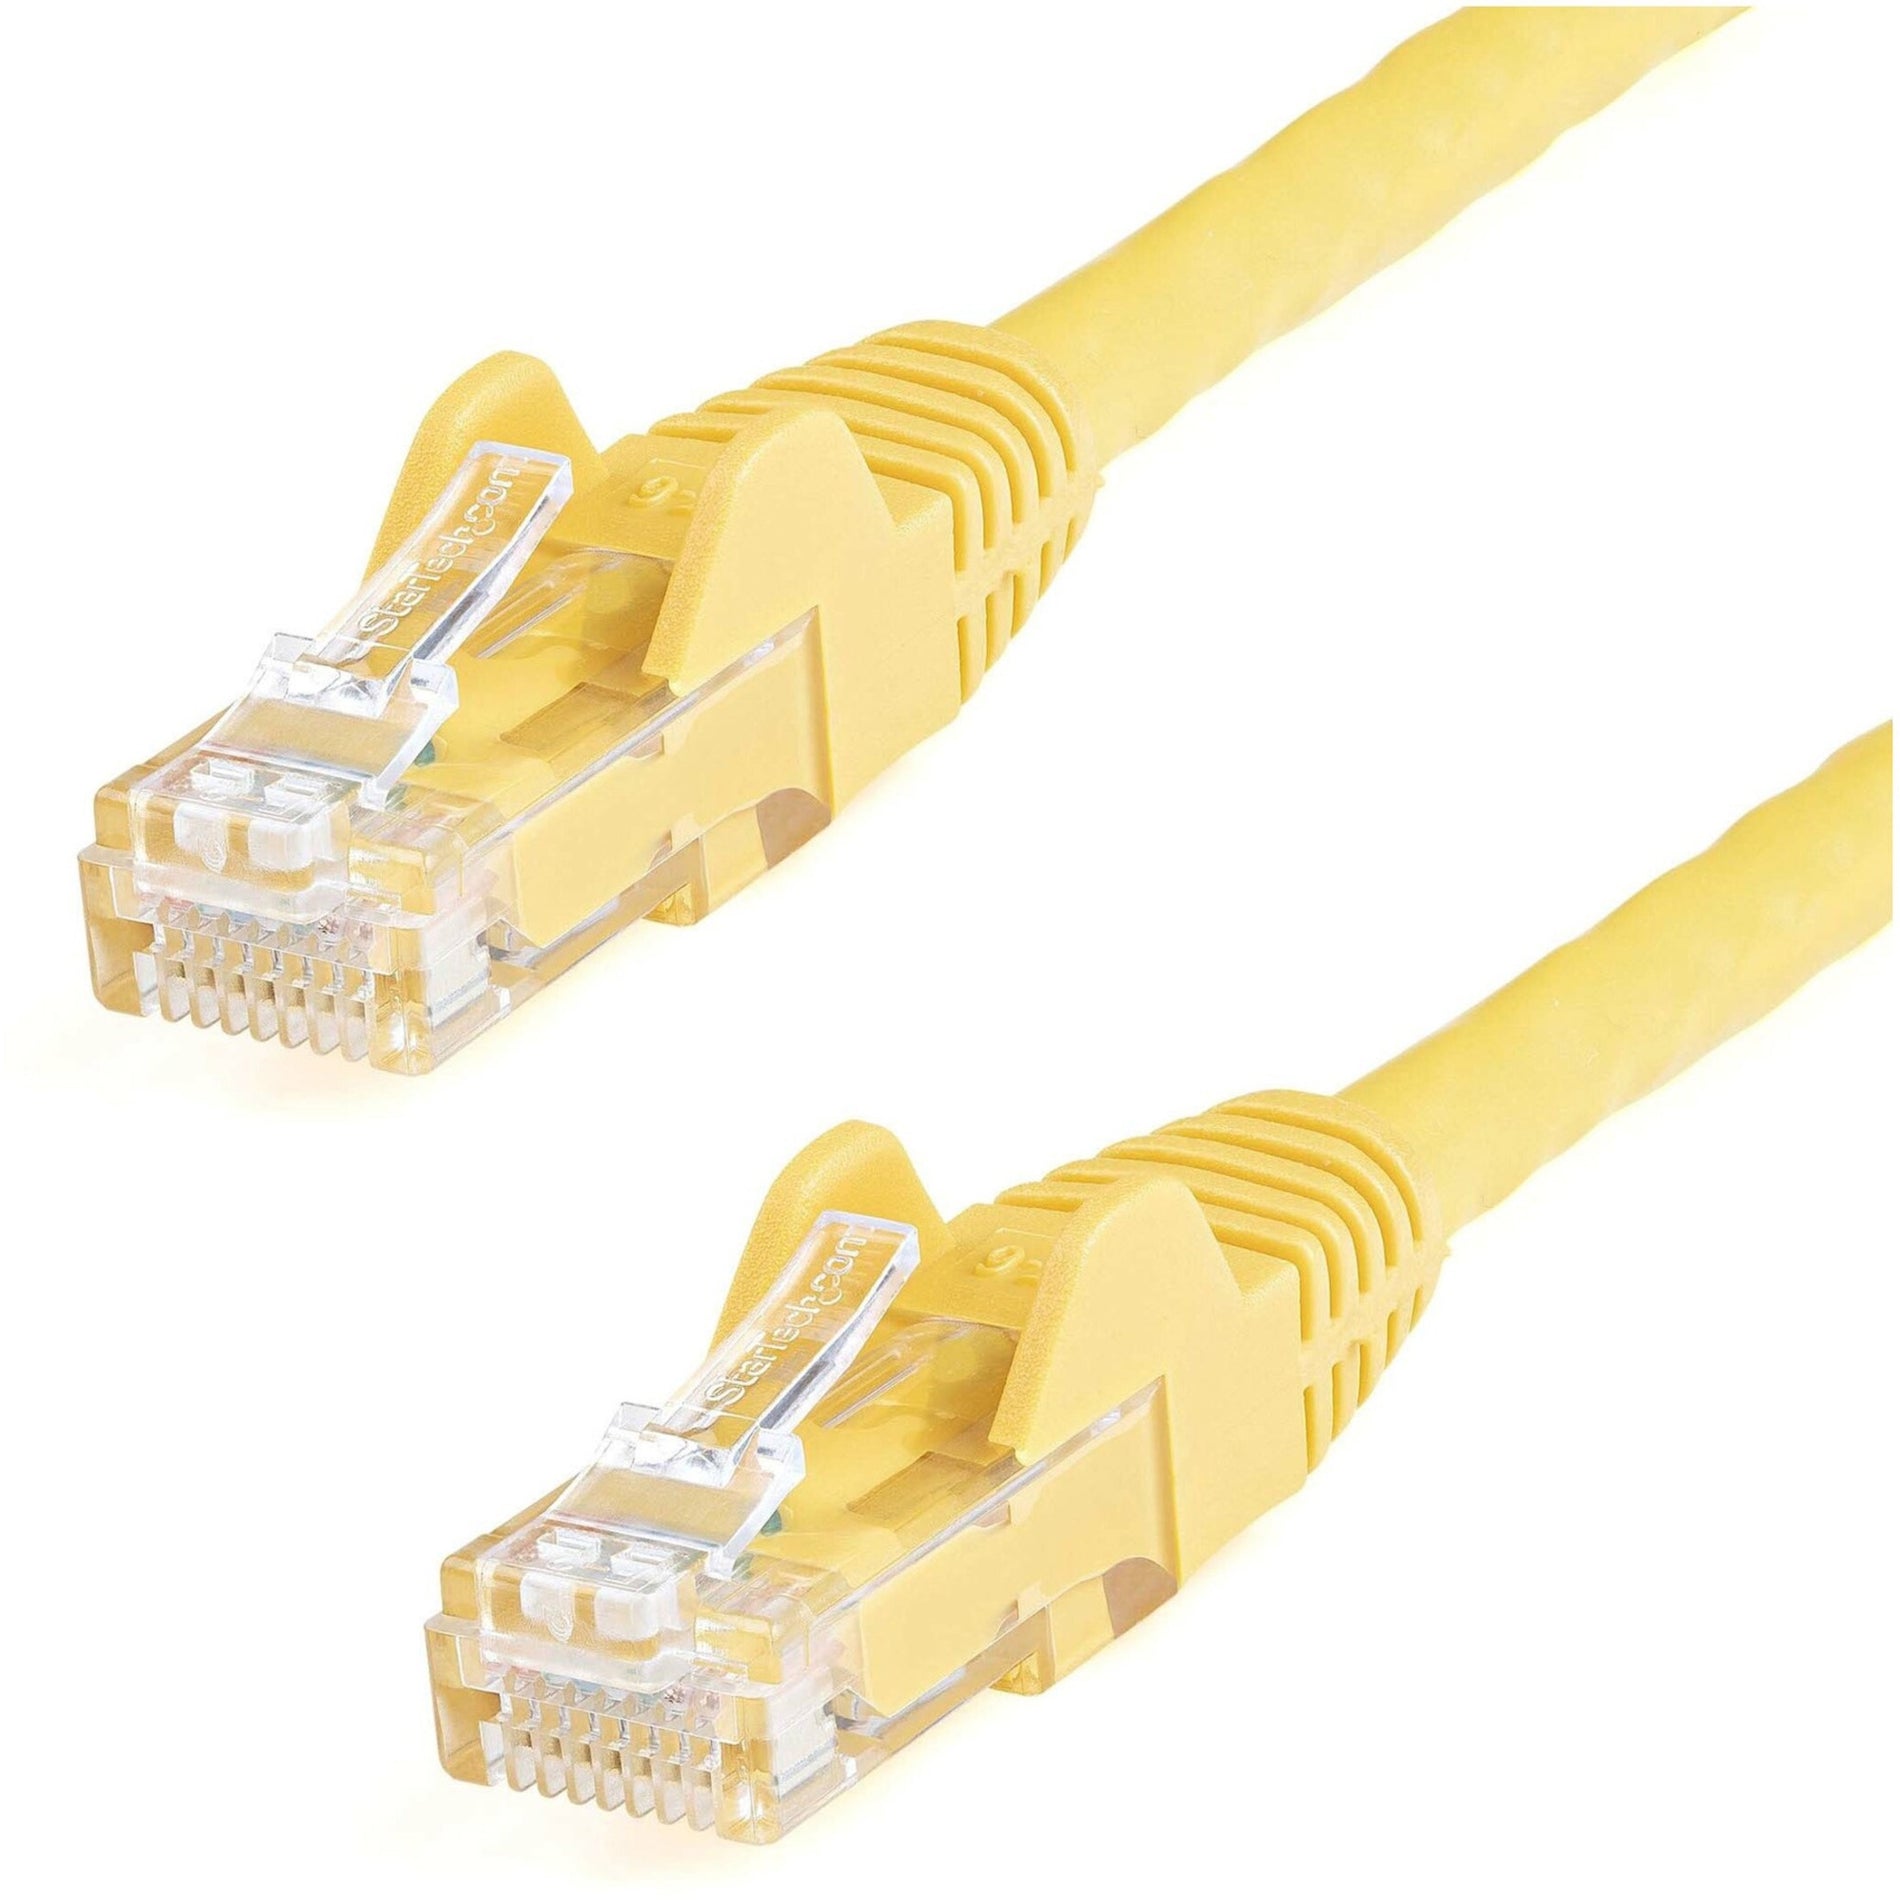 StarTech.com N6PATCH9YL Cat6 Patch Cable, 9 ft Yellow Ethernet Cable with Snagless RJ45 Connectors